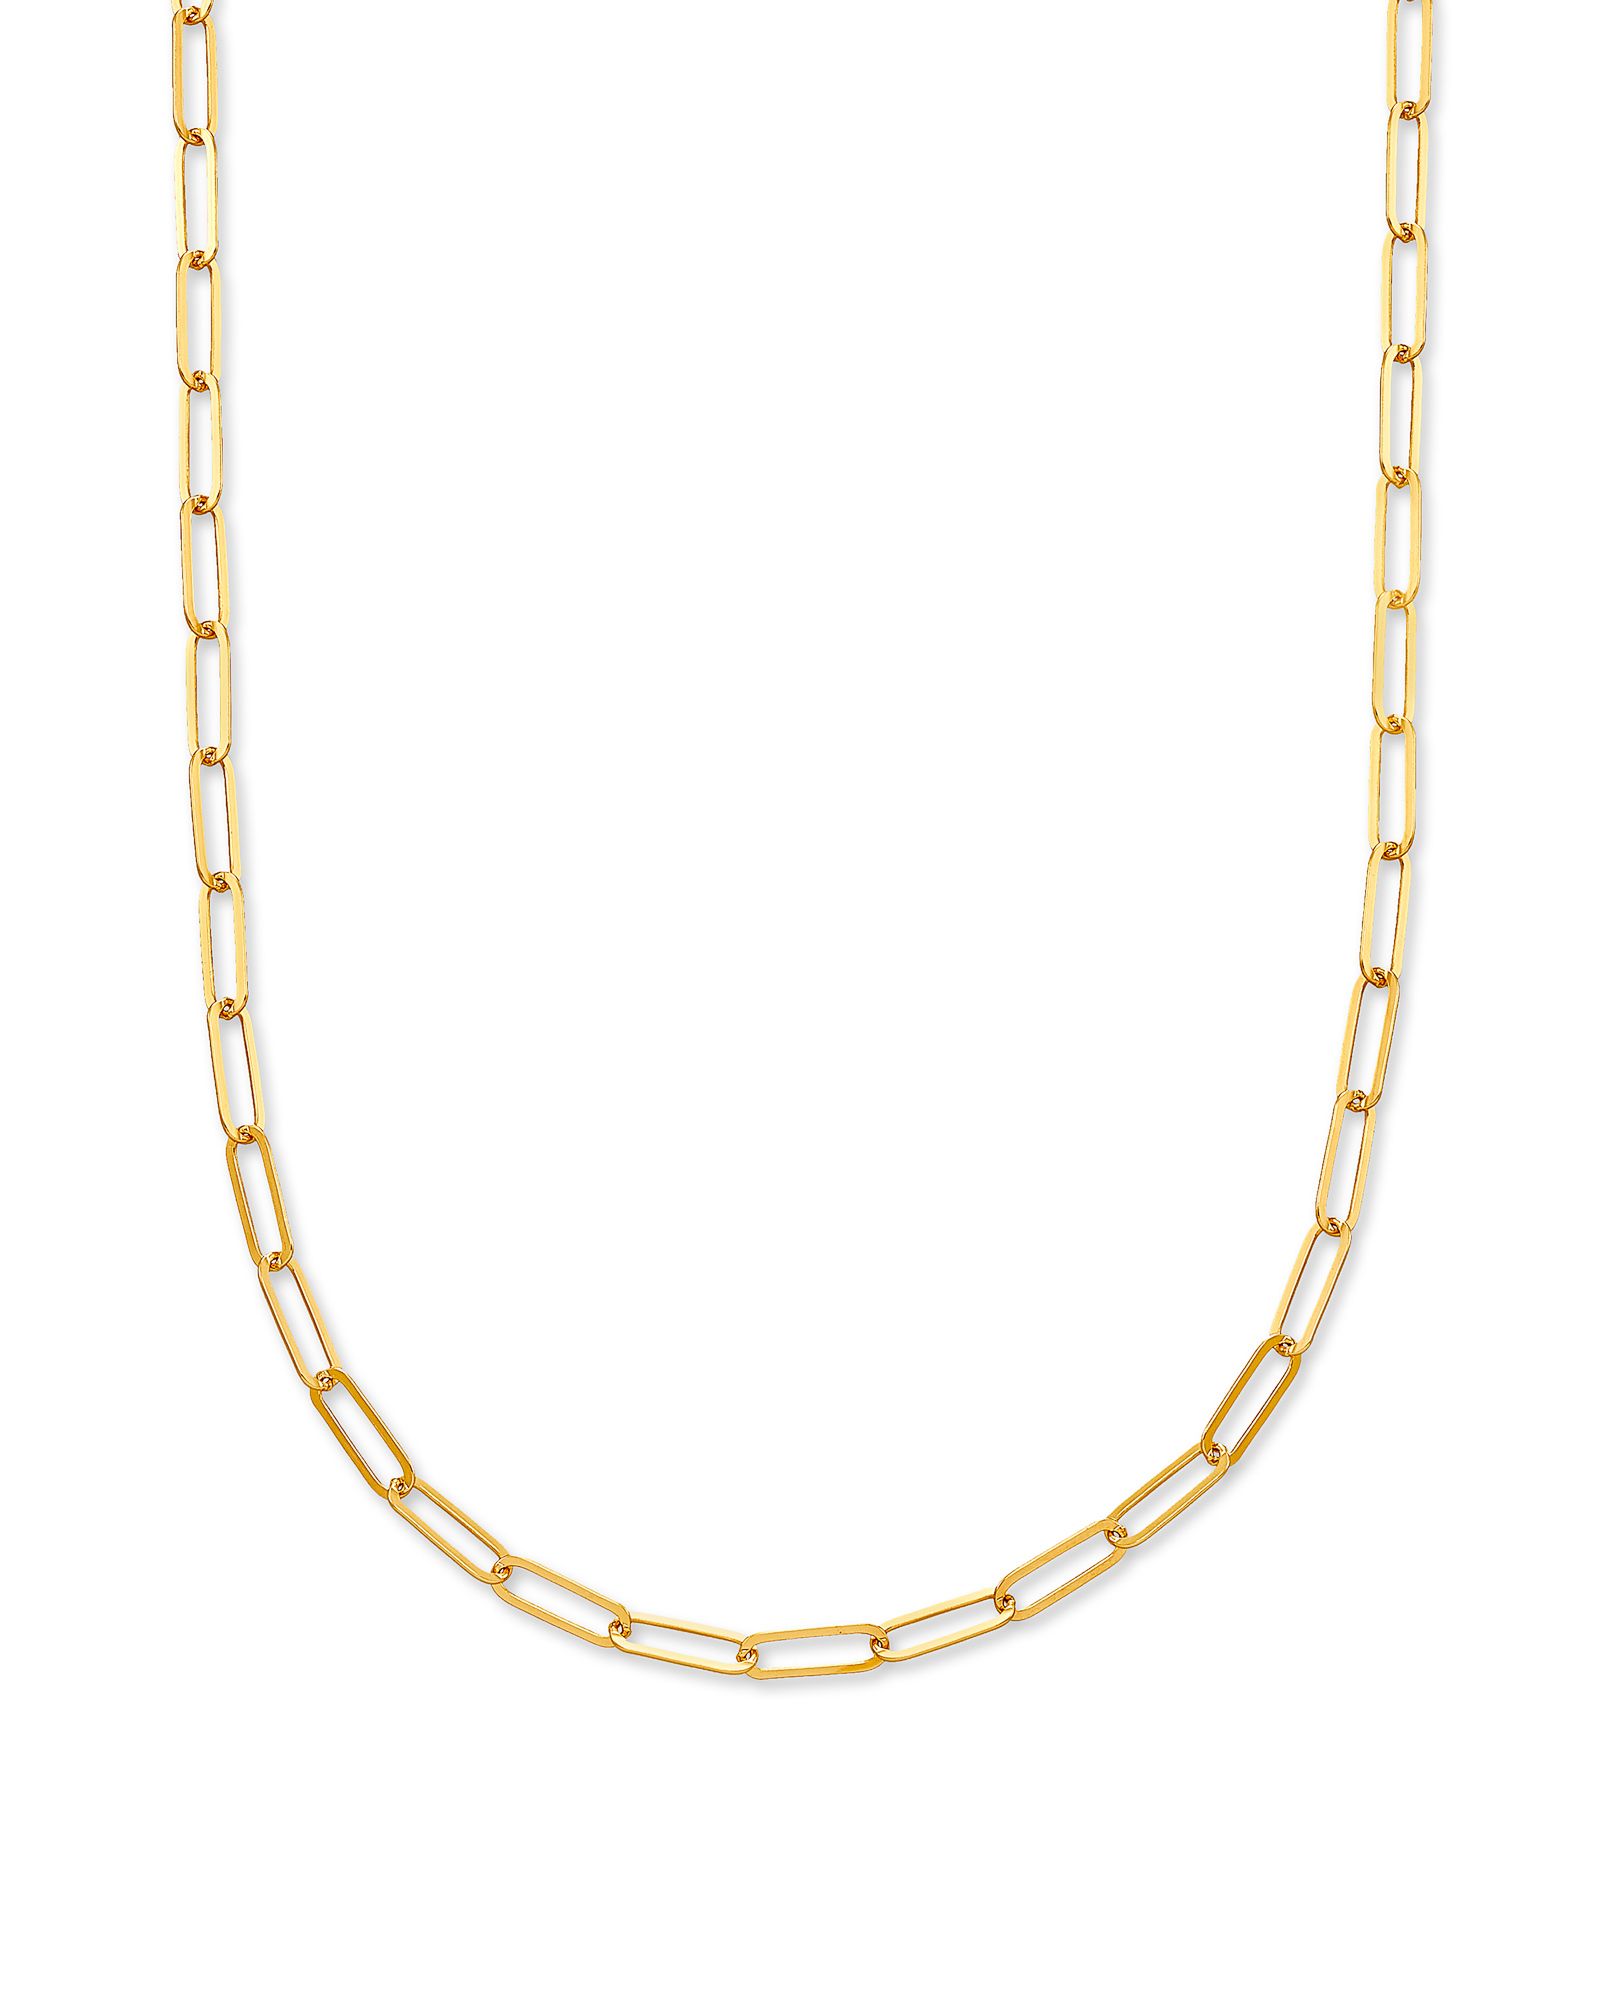 Large Paperclip Chain Necklace in 18k Yellow Gold Vermeil | Kendra Scott | Kendra Scott